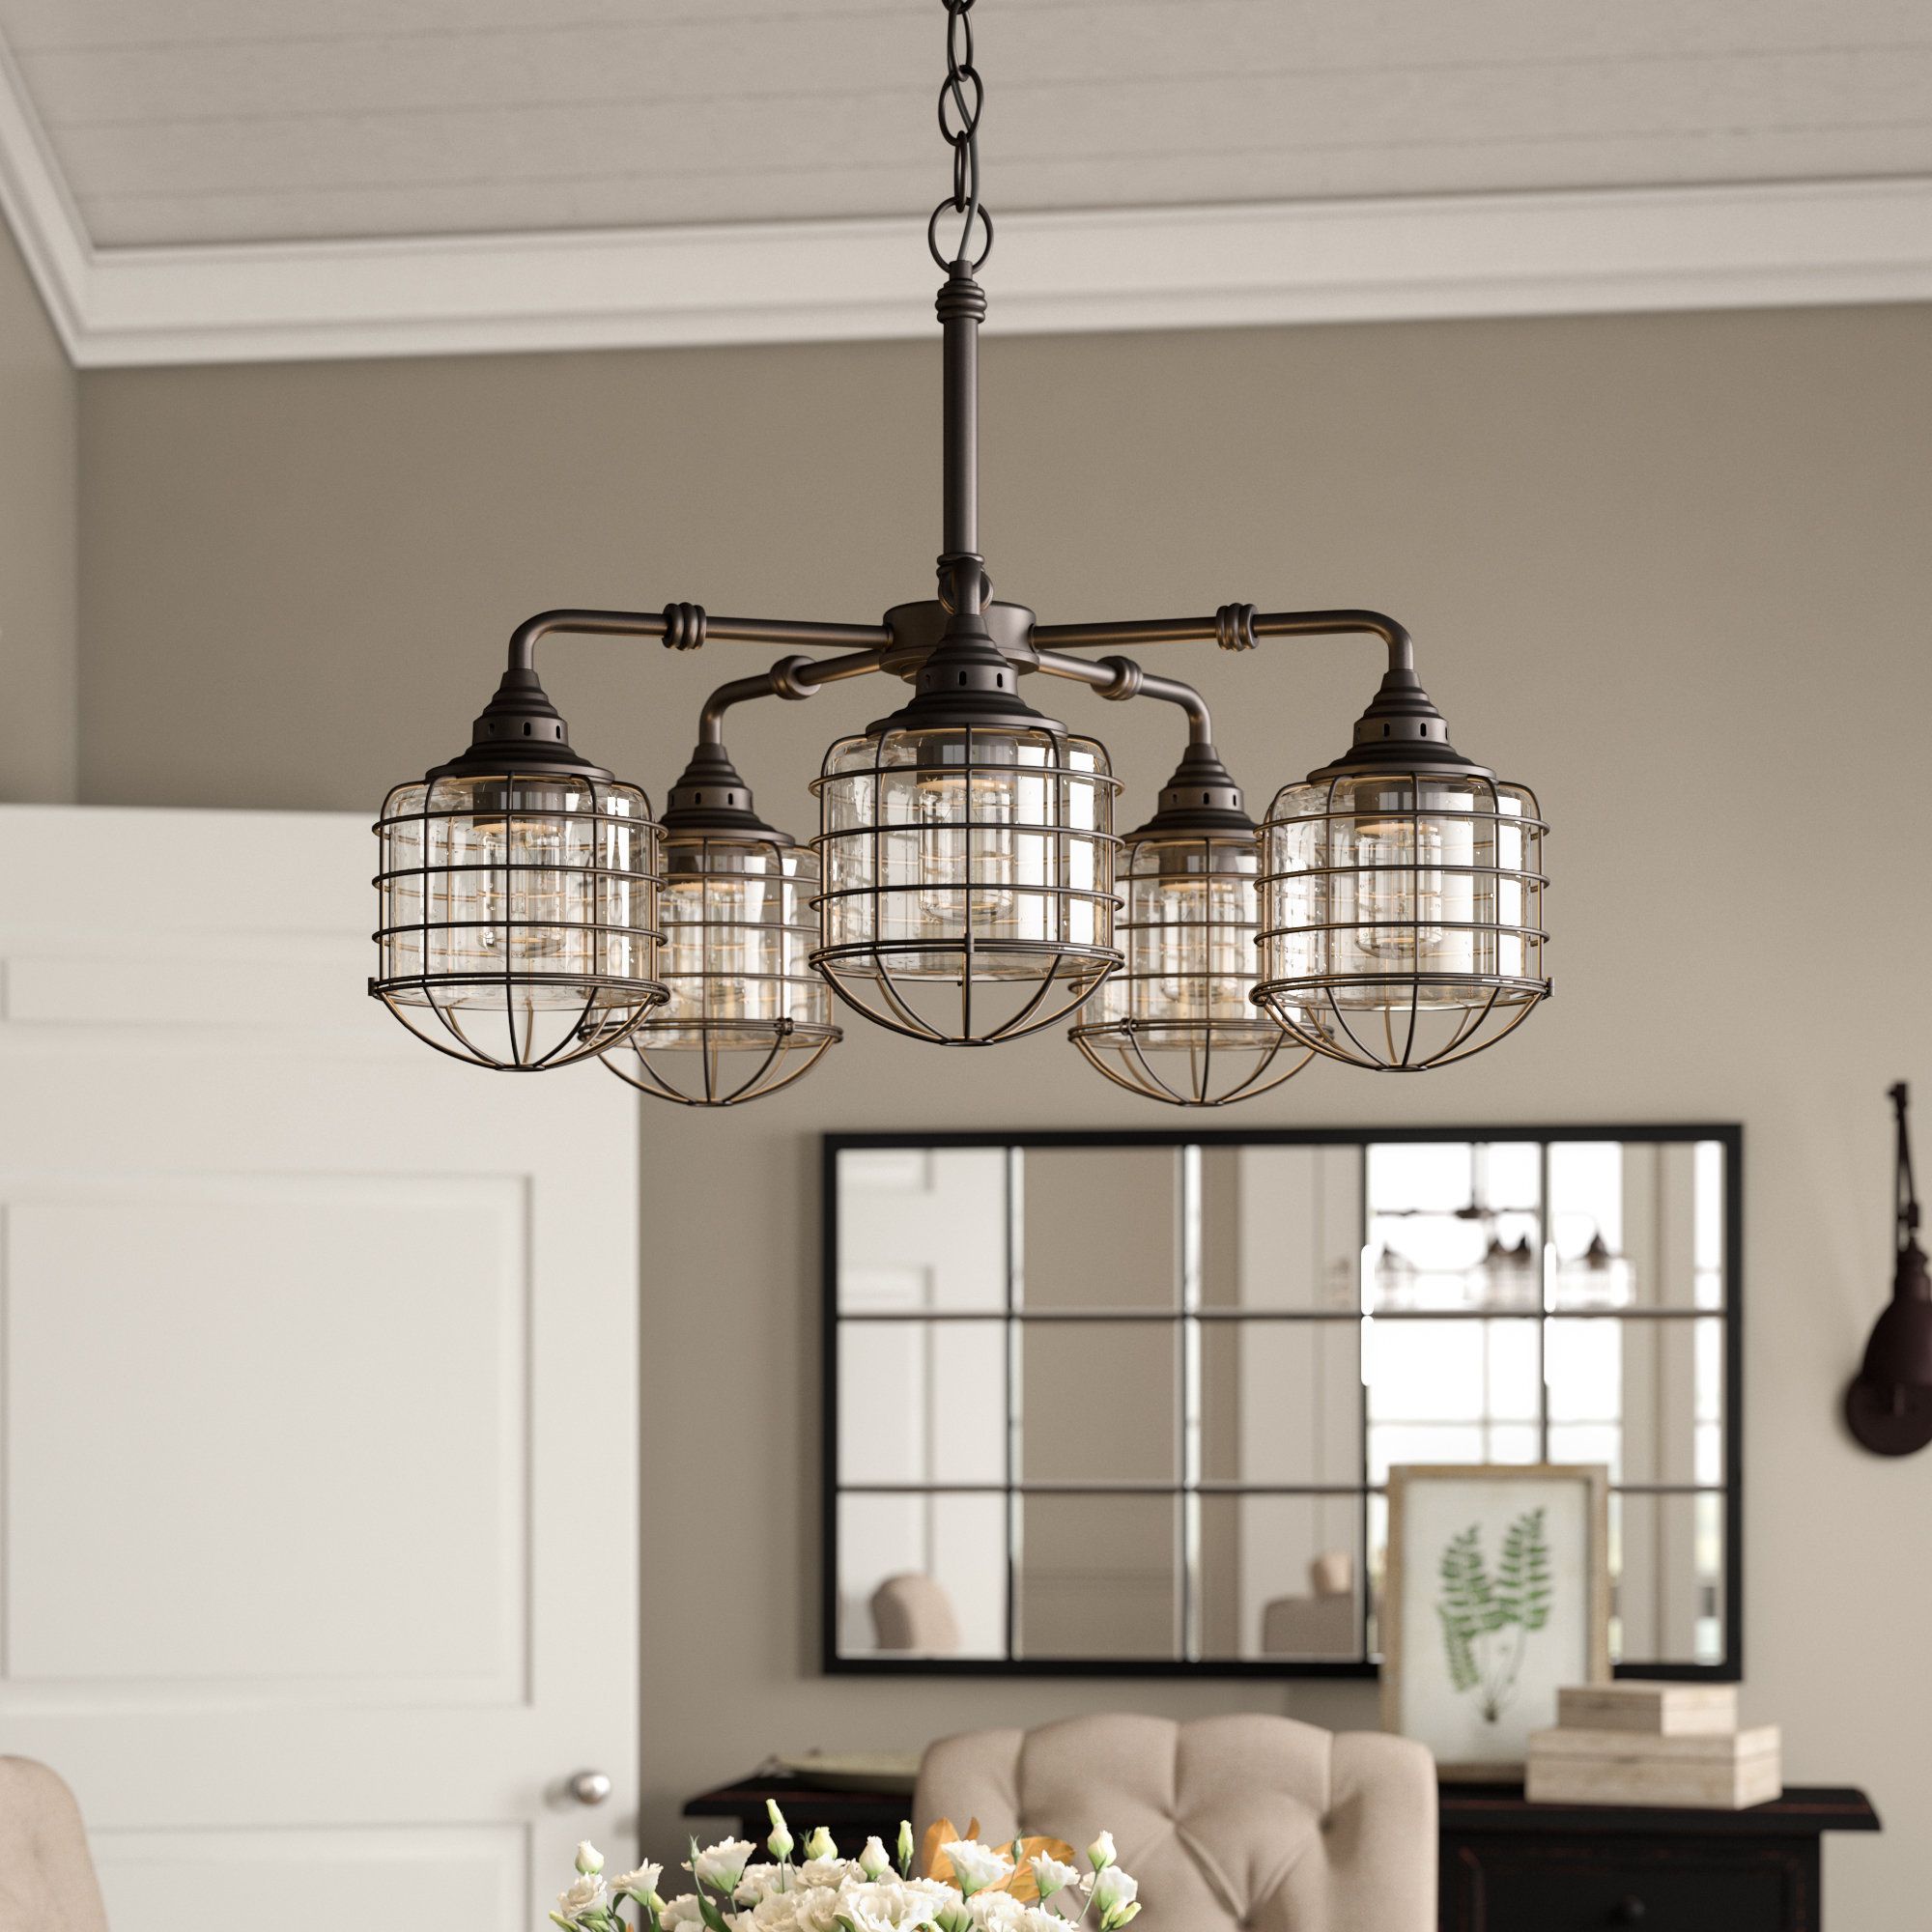 Roberts 5 Light Shaded Chandelier In Popular Benedetto 5 Light Crystal Chandeliers (View 12 of 25)